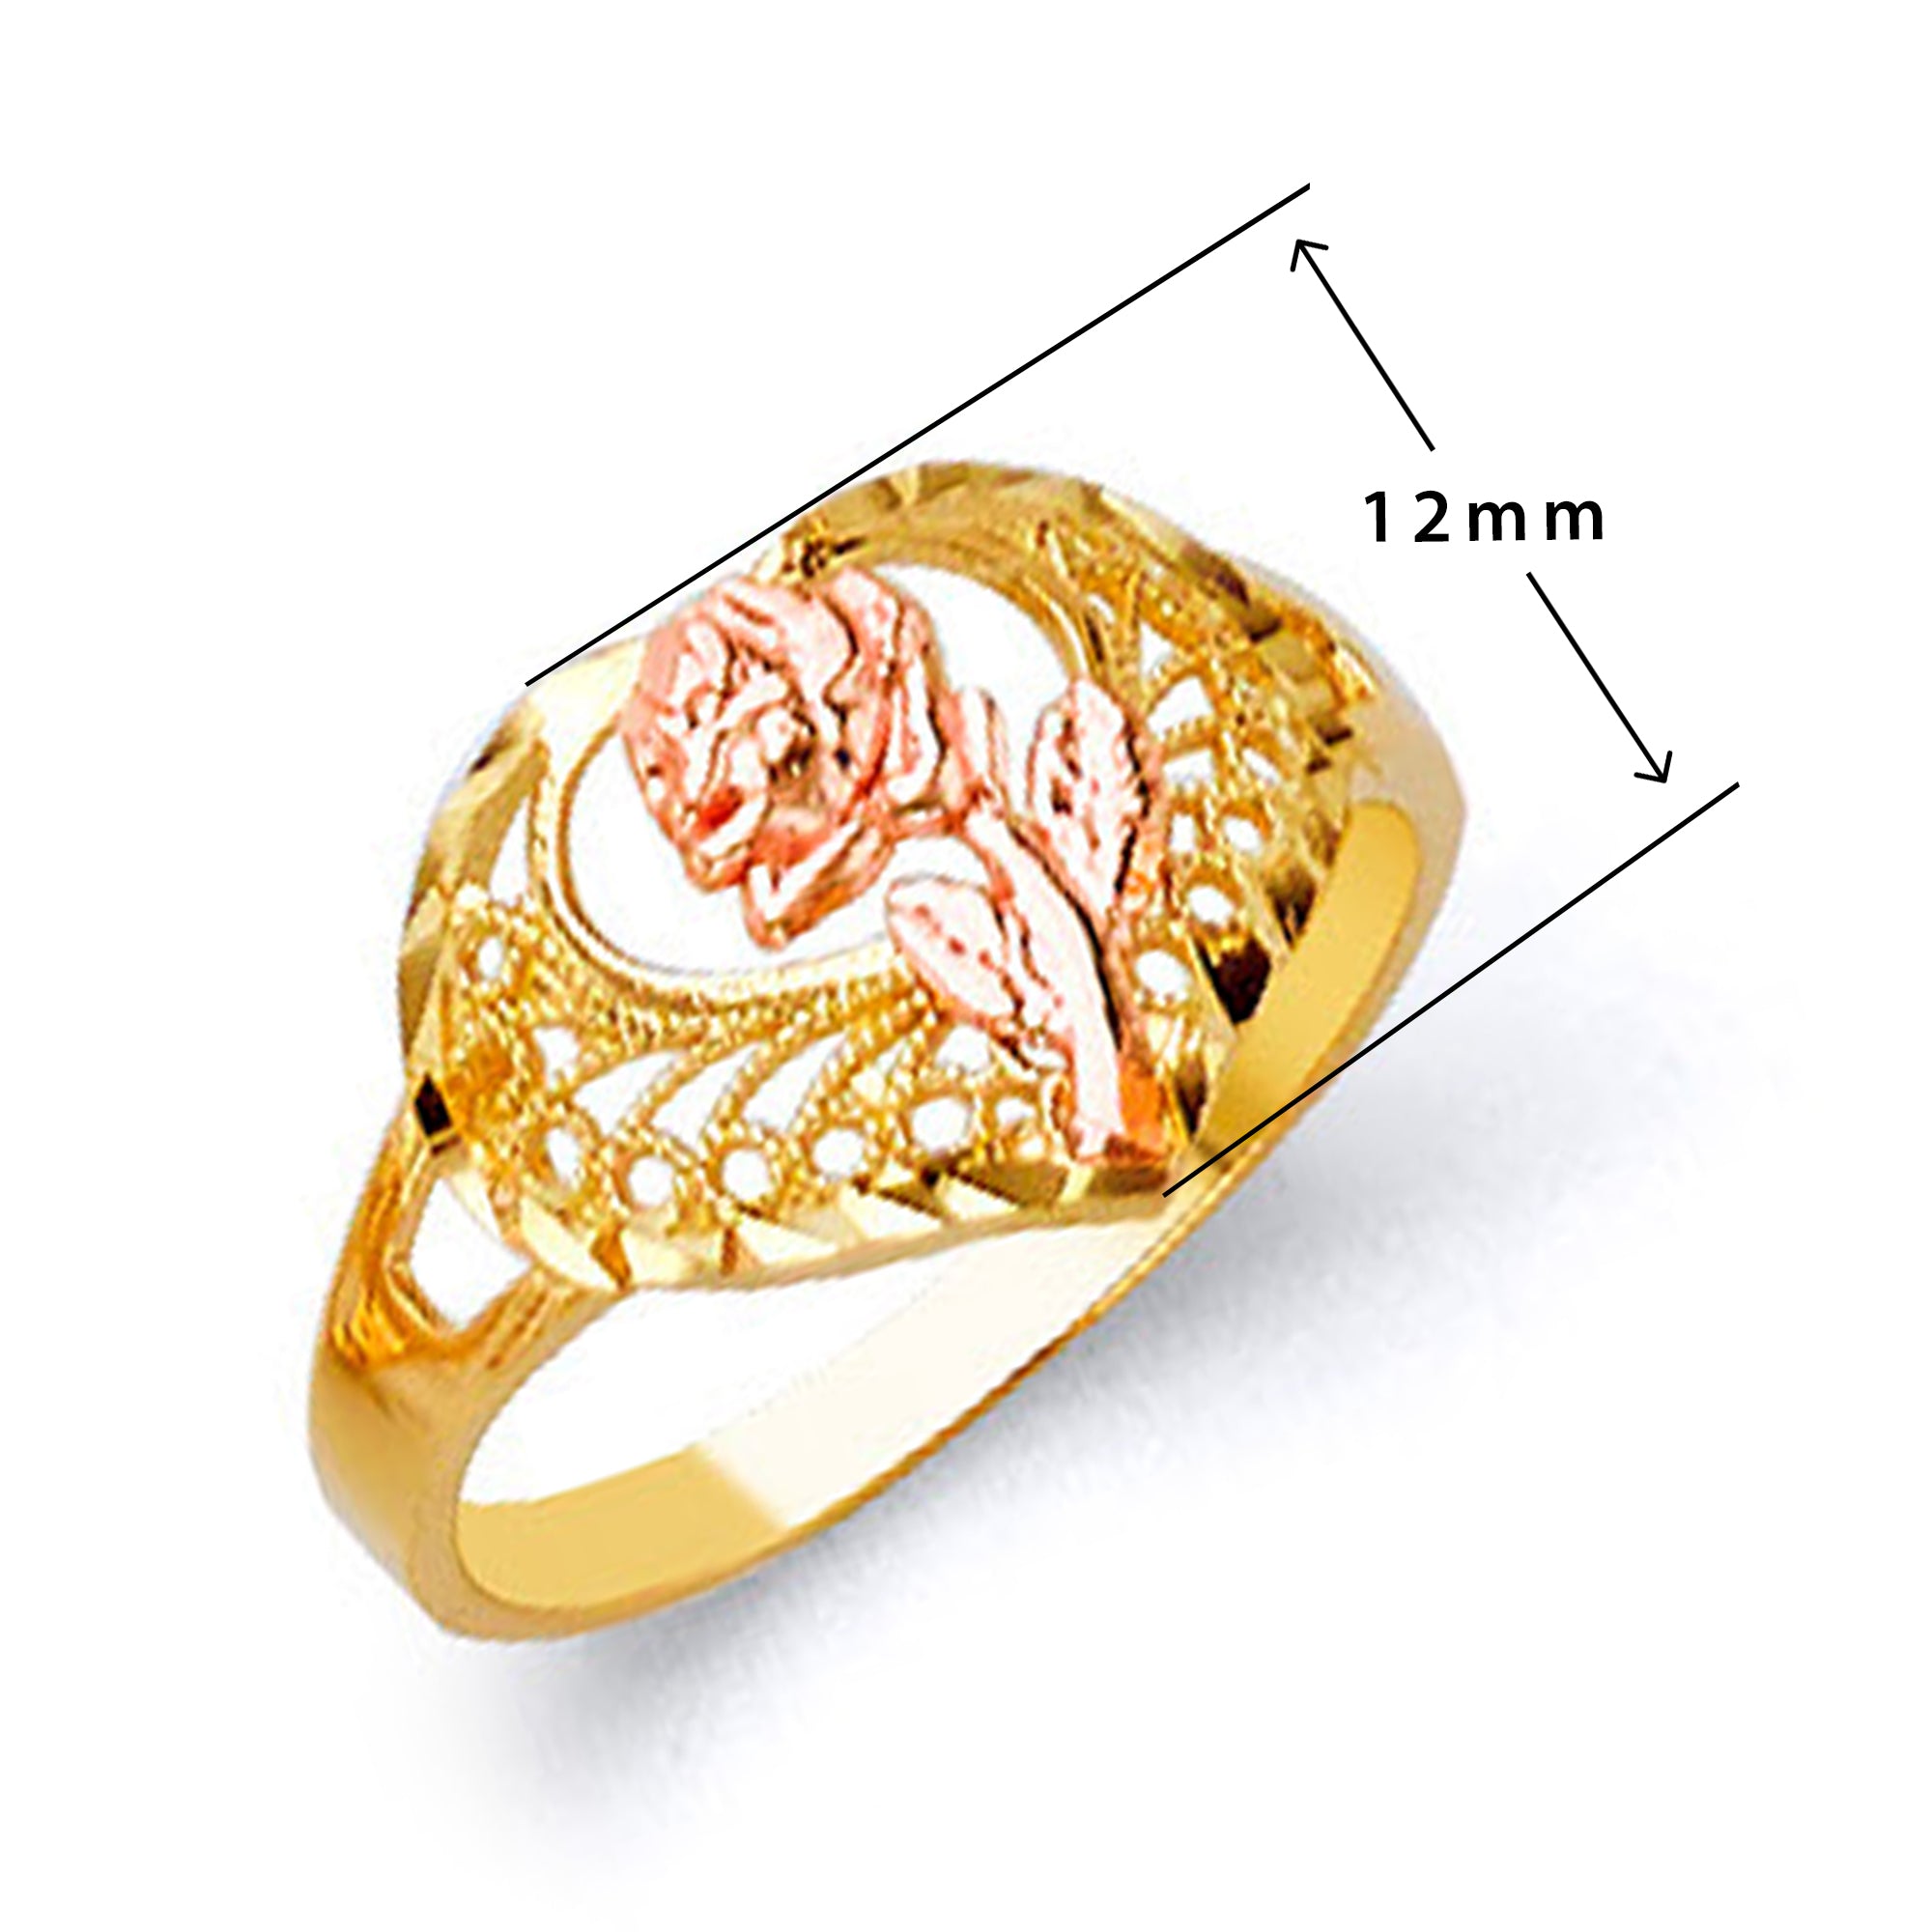 Rose-casted Heart Ring in Solid Gold with Measurement